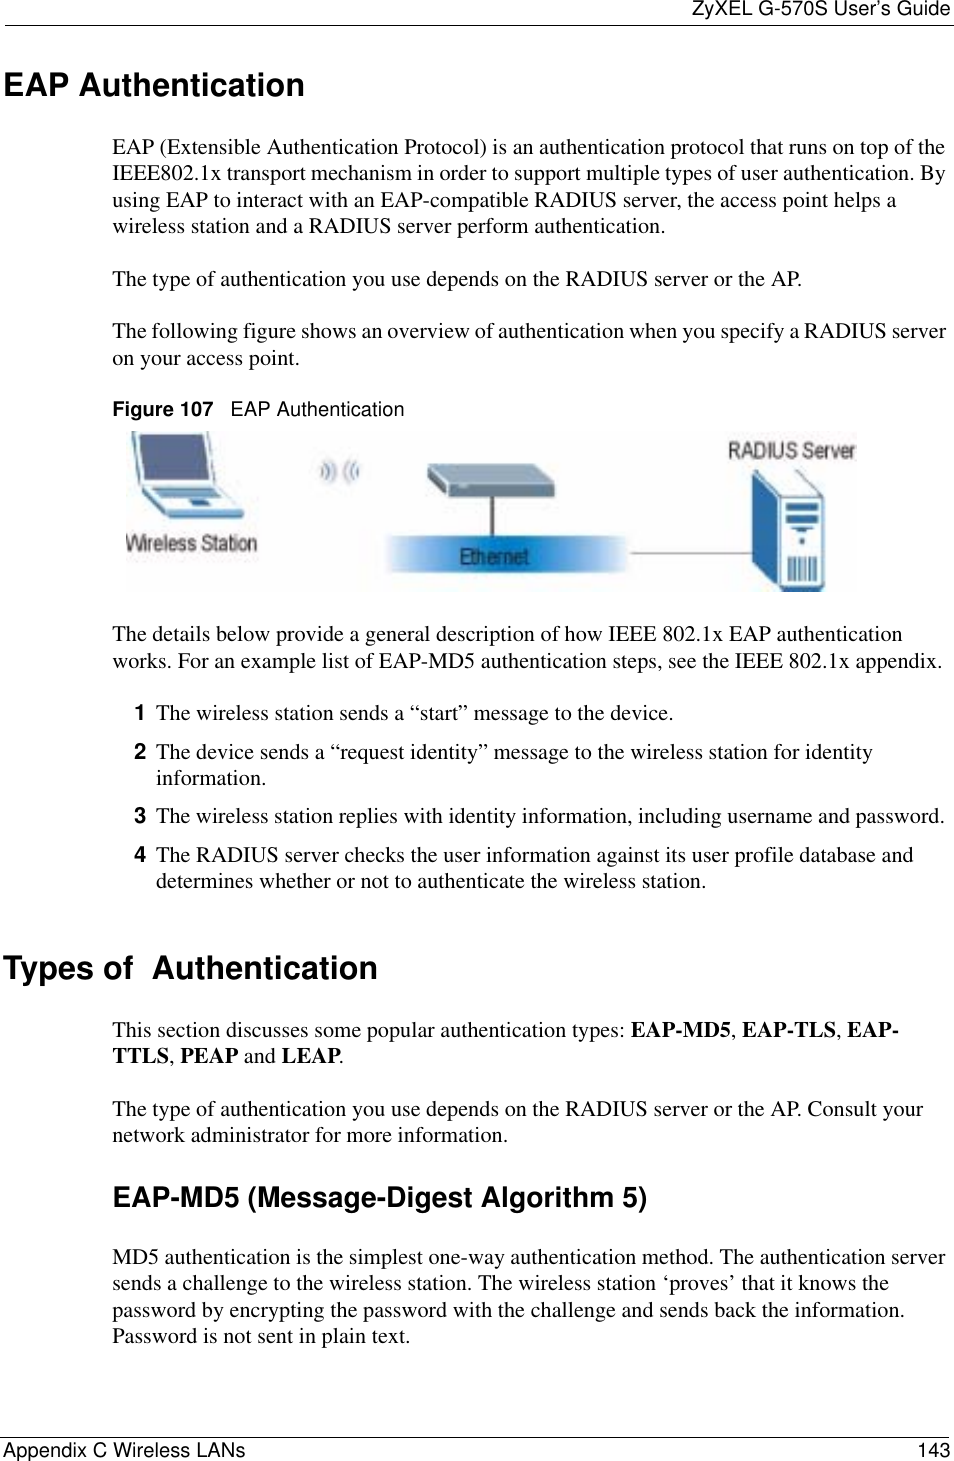 ZyXEL G-570S User’s GuideAppendix C Wireless LANs 143EAP AuthenticationEAP (Extensible Authentication Protocol) is an authentication protocol that runs on top of the IEEE802.1x transport mechanism in order to support multiple types of user authentication. By using EAP to interact with an EAP-compatible RADIUS server, the access point helps a wireless station and a RADIUS server perform authentication.The type of authentication you use depends on the RADIUS server or the AP. The following figure shows an overview of authentication when you specify a RADIUS server on your access point.Figure 107   EAP AuthenticationThe details below provide a general description of how IEEE 802.1x EAP authentication works. For an example list of EAP-MD5 authentication steps, see the IEEE 802.1x appendix. 1The wireless station sends a “start” message to the device. 2The device sends a “request identity” message to the wireless station for identity information.3The wireless station replies with identity information, including username and password. 4The RADIUS server checks the user information against its user profile database and determines whether or not to authenticate the wireless station.Types of  Authentication This section discusses some popular authentication types: EAP-MD5,EAP-TLS,EAP-TTLS,PEAP and LEAP.The type of authentication you use depends on the RADIUS server or the AP. Consult your network administrator for more information.EAP-MD5 (Message-Digest Algorithm 5)MD5 authentication is the simplest one-way authentication method. The authentication server sends a challenge to the wireless station. The wireless station ‘proves’ that it knows the password by encrypting the password with the challenge and sends back the information. Password is not sent in plain text. 